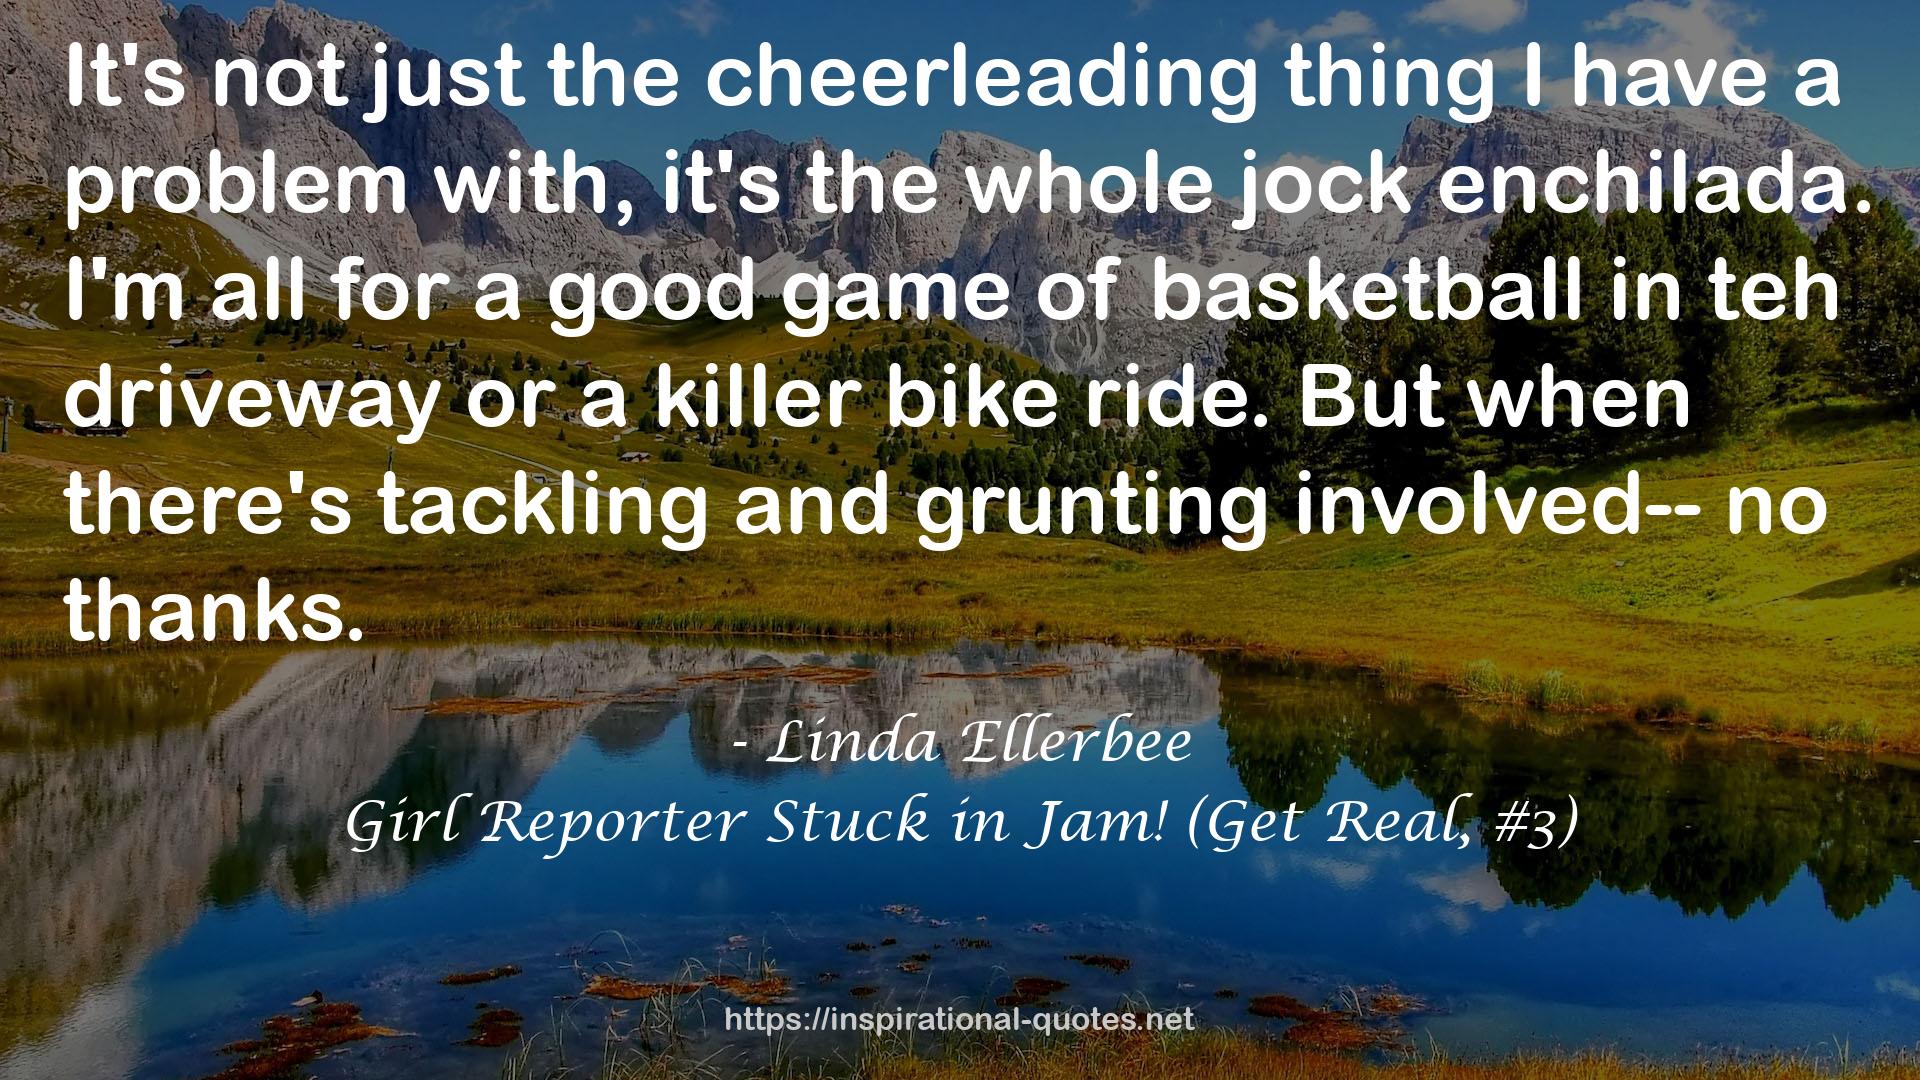 Girl Reporter Stuck in Jam! (Get Real, #3) QUOTES